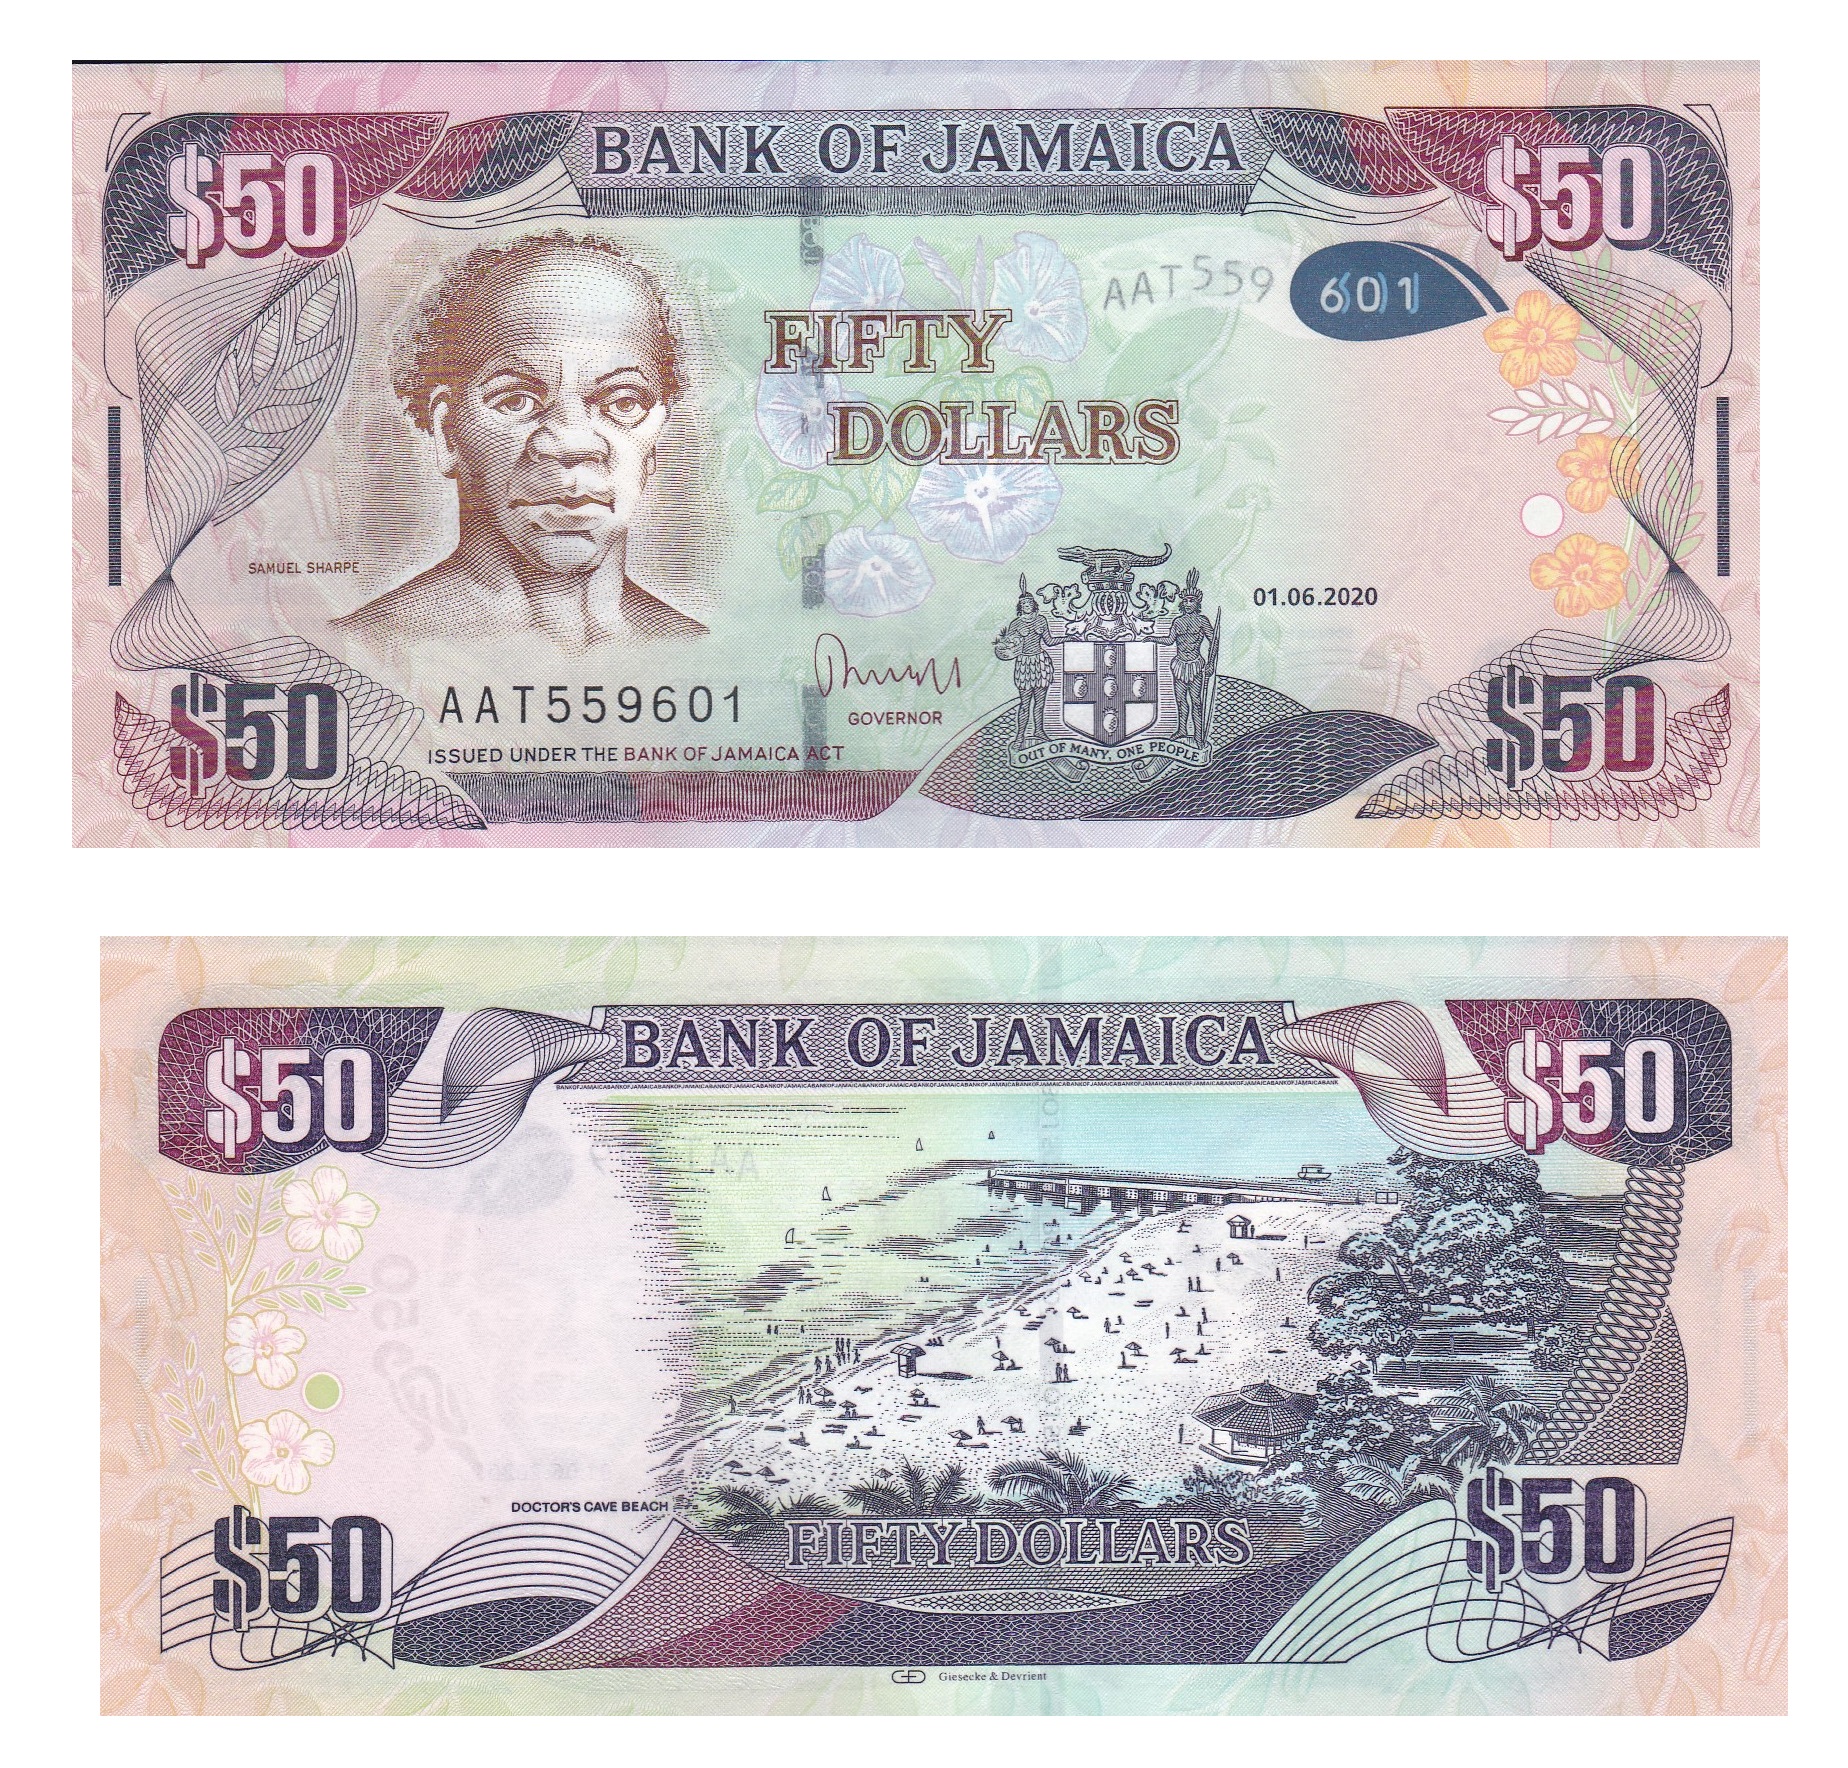 Jamaica 50 Dollars - Foreign Currency